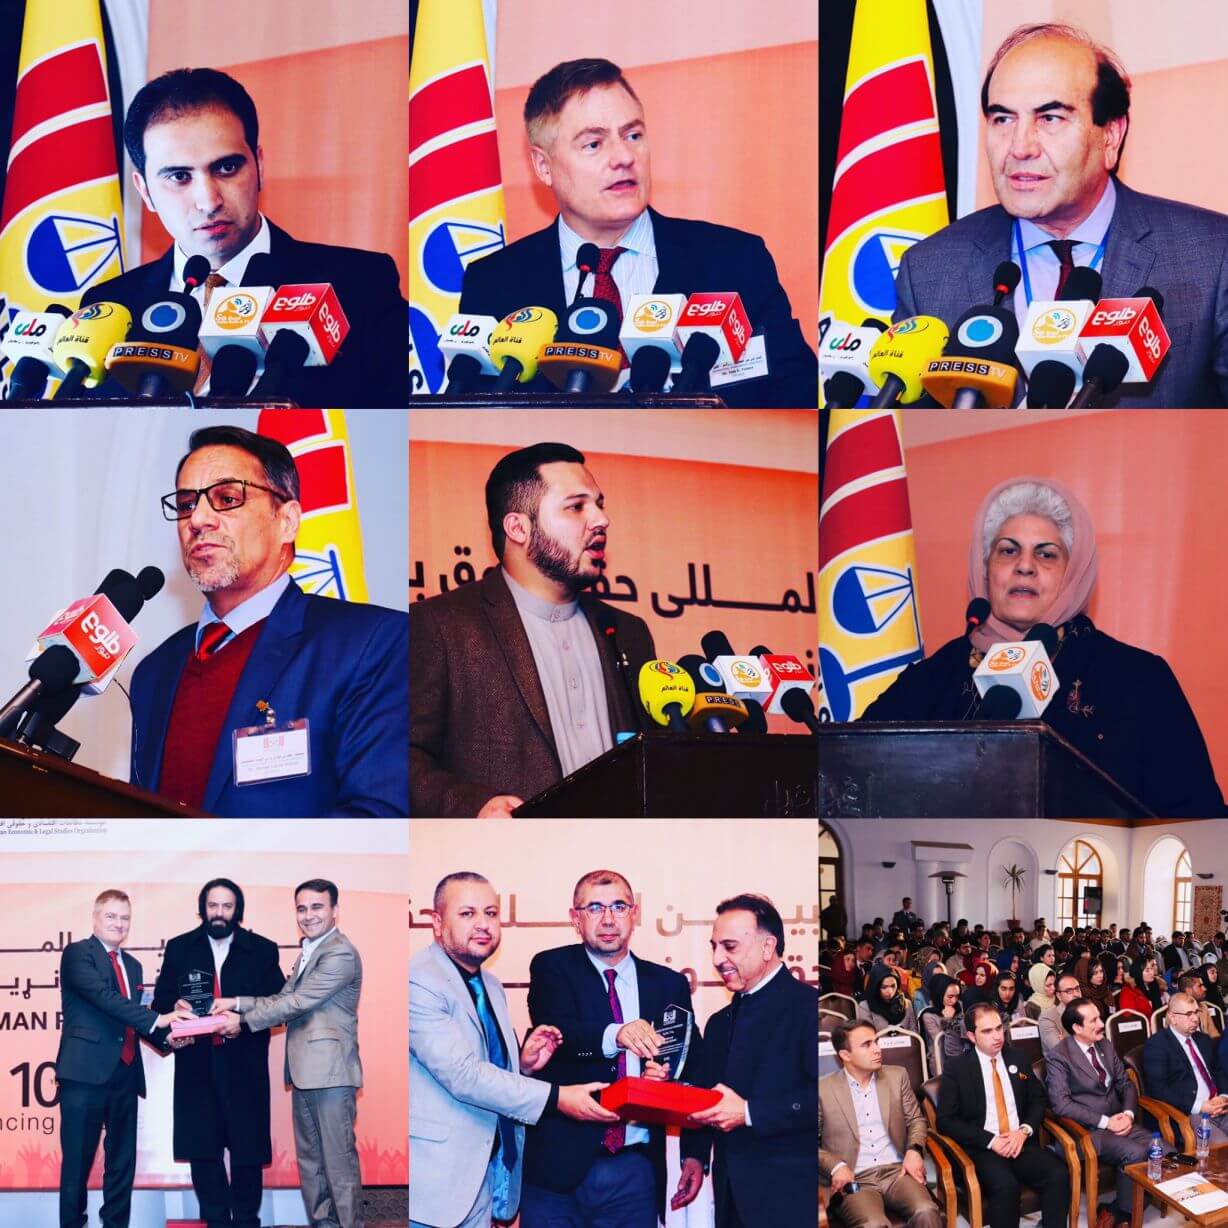 Key speakers of the conference